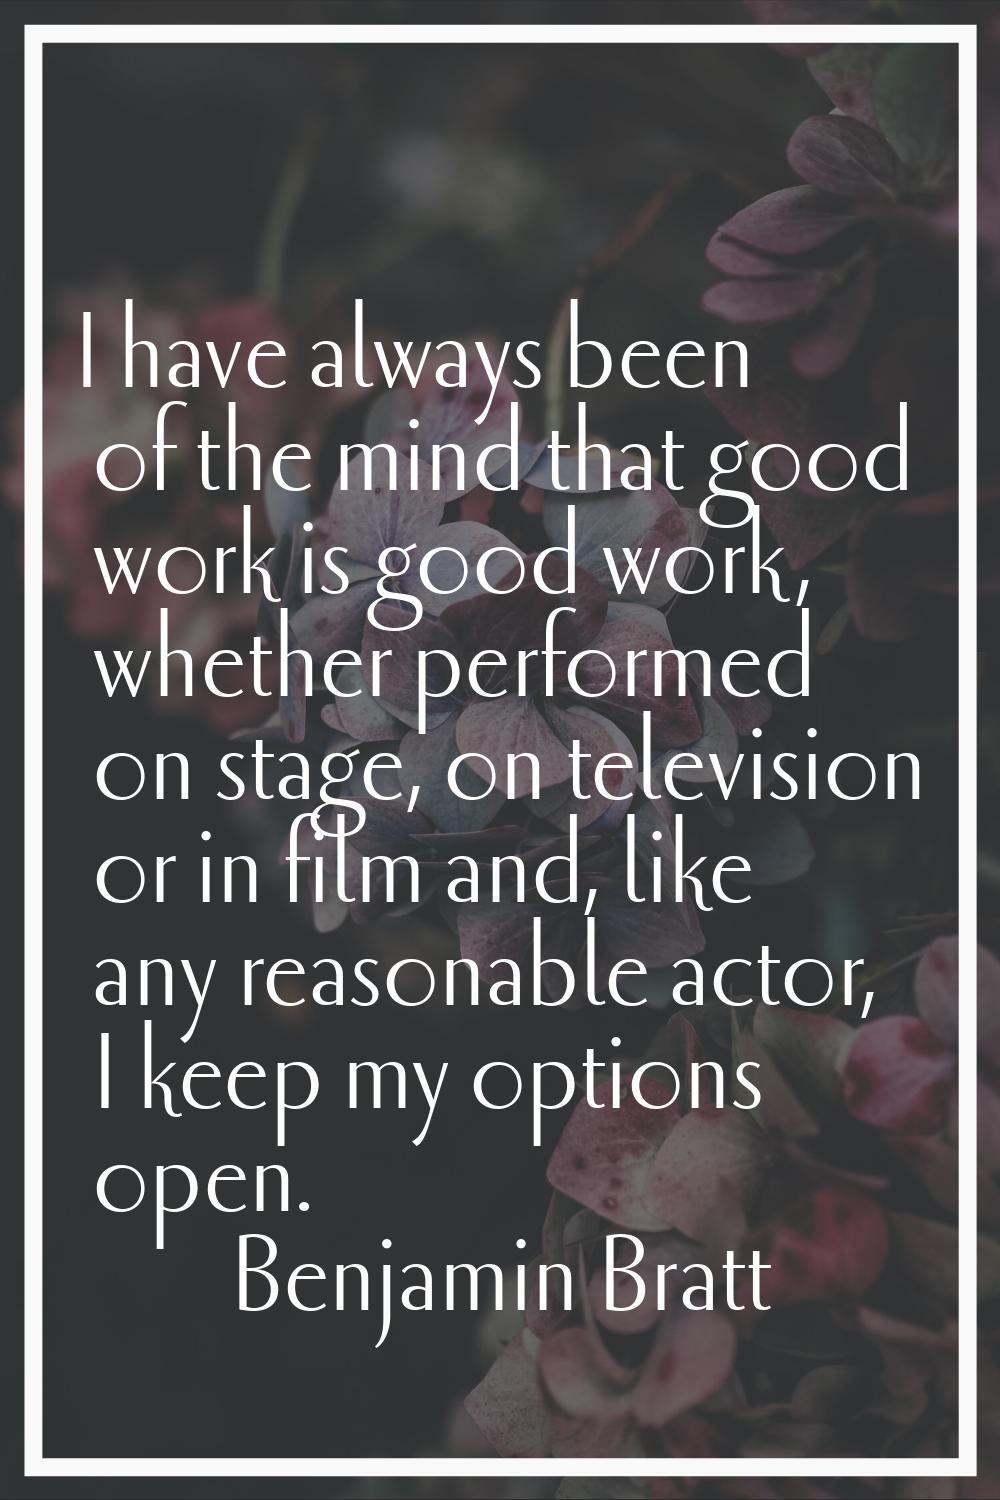 I have always been of the mind that good work is good work, whether performed on stage, on televisi